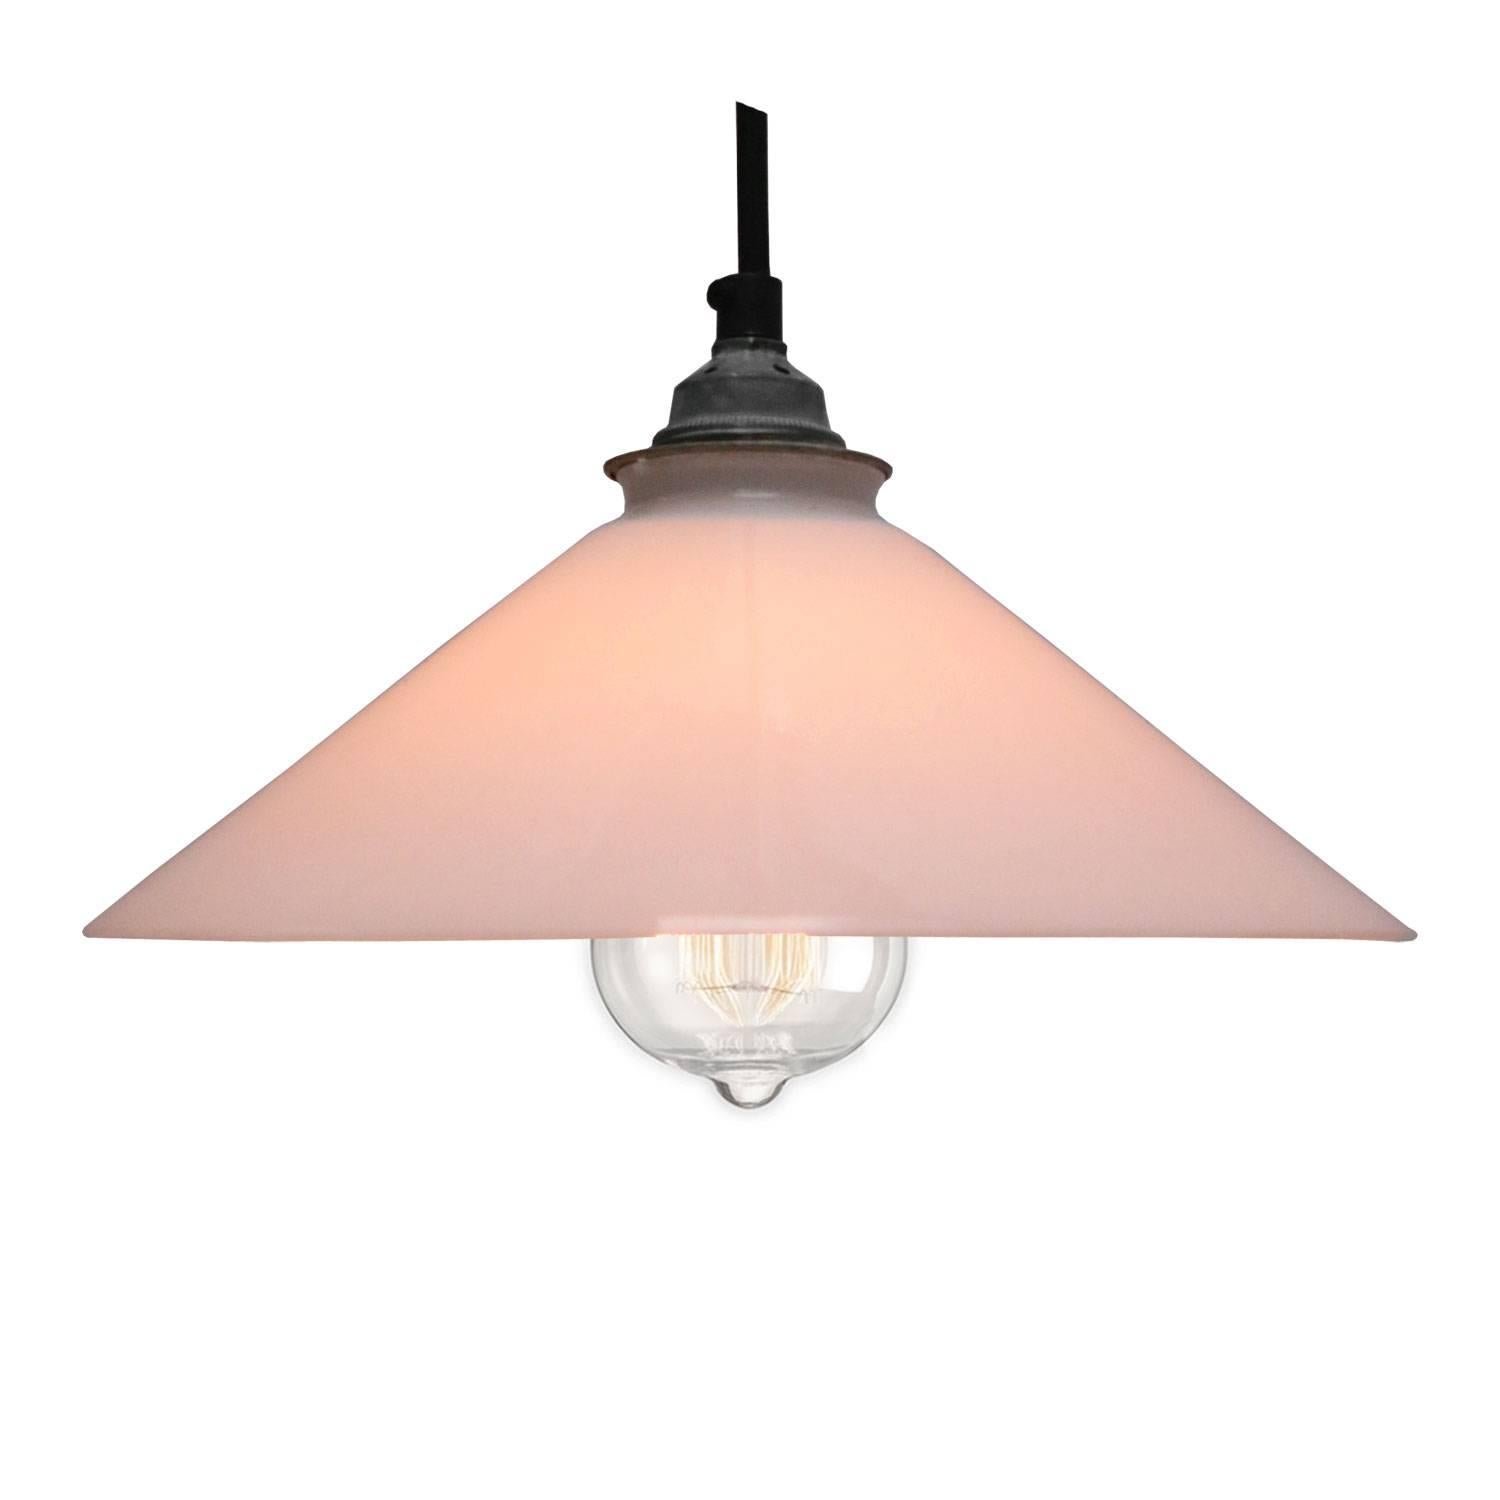 French Opaline glass Industrial pendant. Excluding light bulb.

Measure: Weight 1.0 kg / 2.2 lb

All lamps have been made suitable by international standards for incandescent light bulbs, energy-efficient and LED bulbs. E26/E27 bulb holders and new